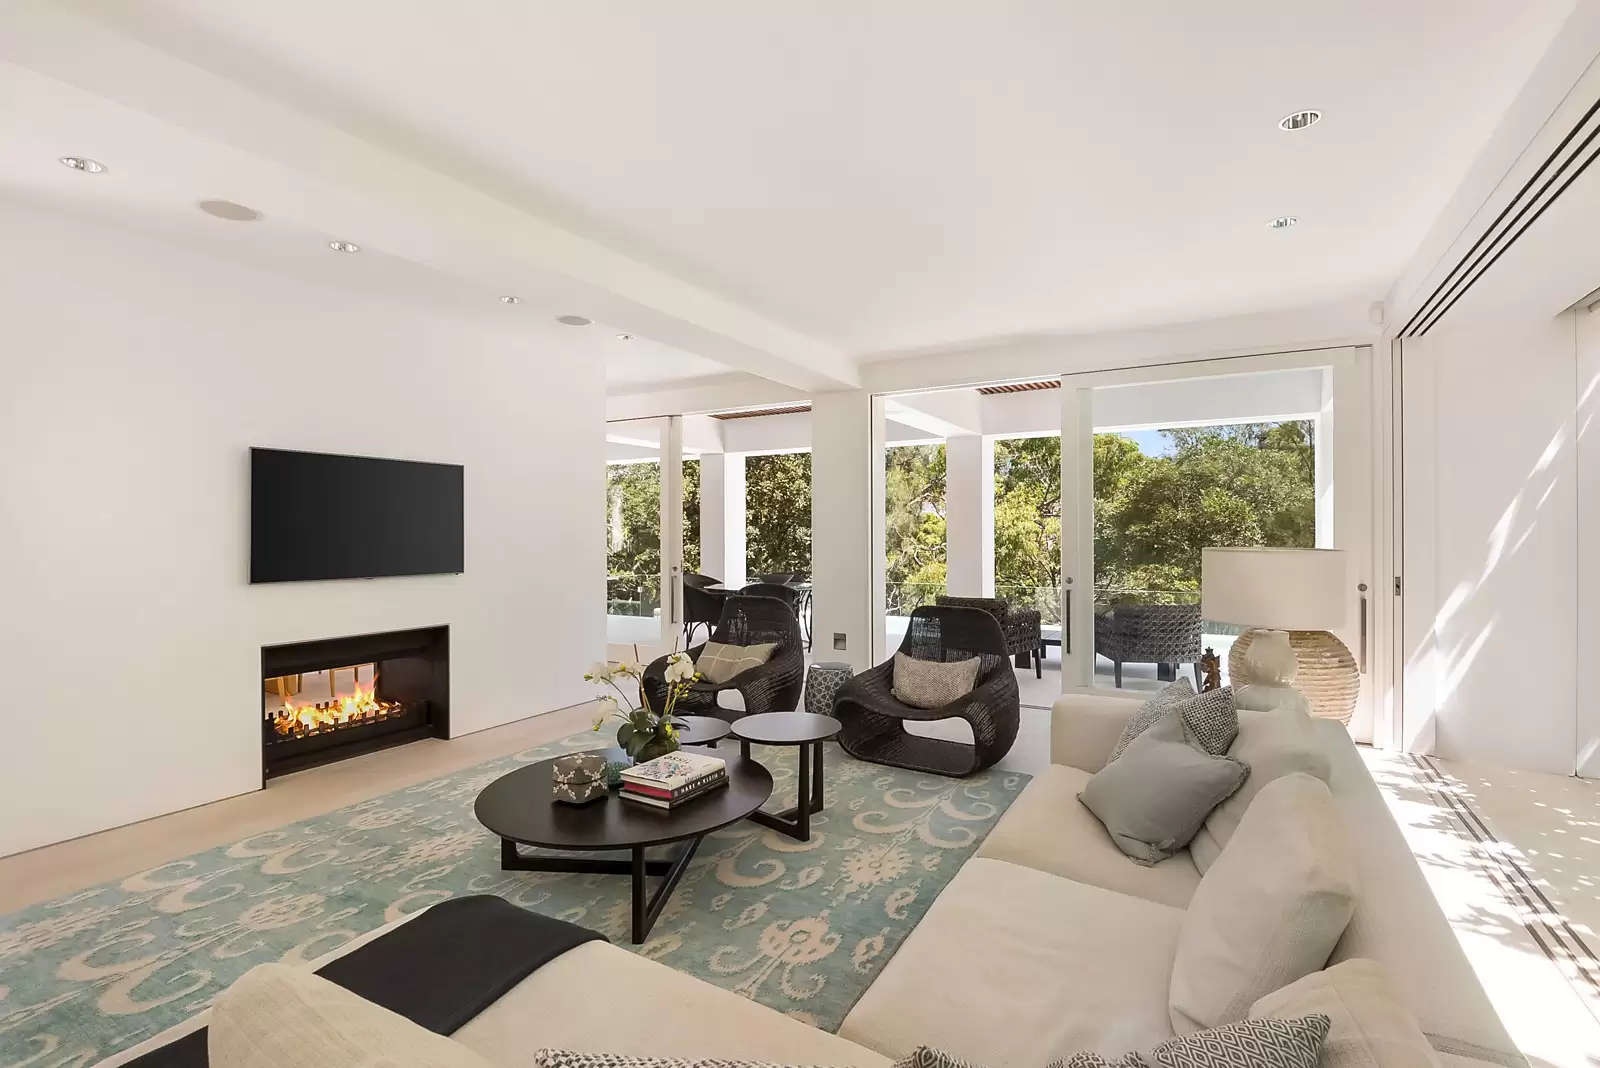 Photo #11: 10 The Crescent, Vaucluse - Sold by Sydney Sotheby's International Realty